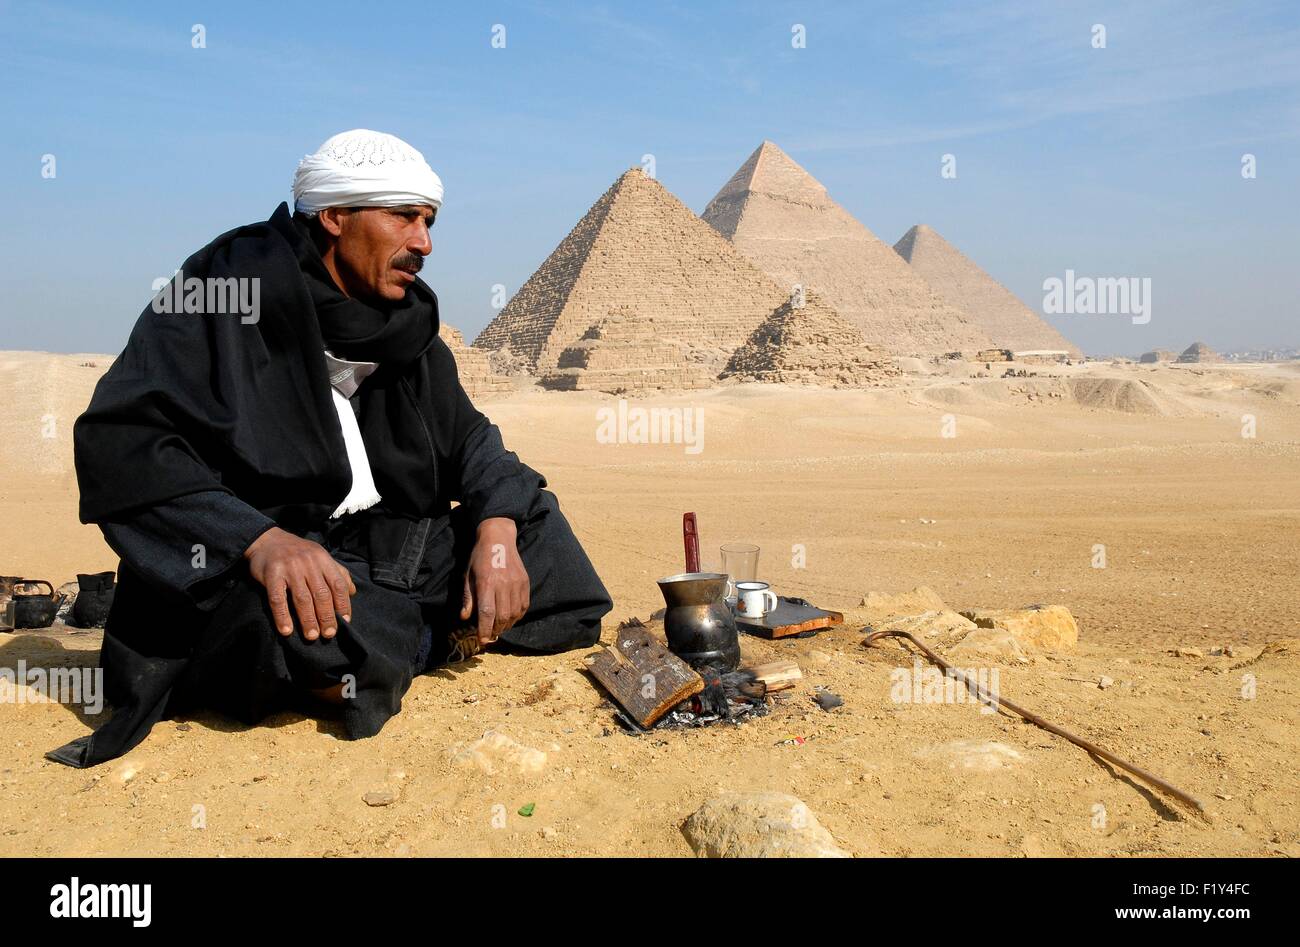 Egypt, Cairo, Giza, listed as World Heritage by UNESCO, in front of the pyramids of Giza, Cheops, Chephren, Mycerinus, a camel, prepare tea Stock Photo